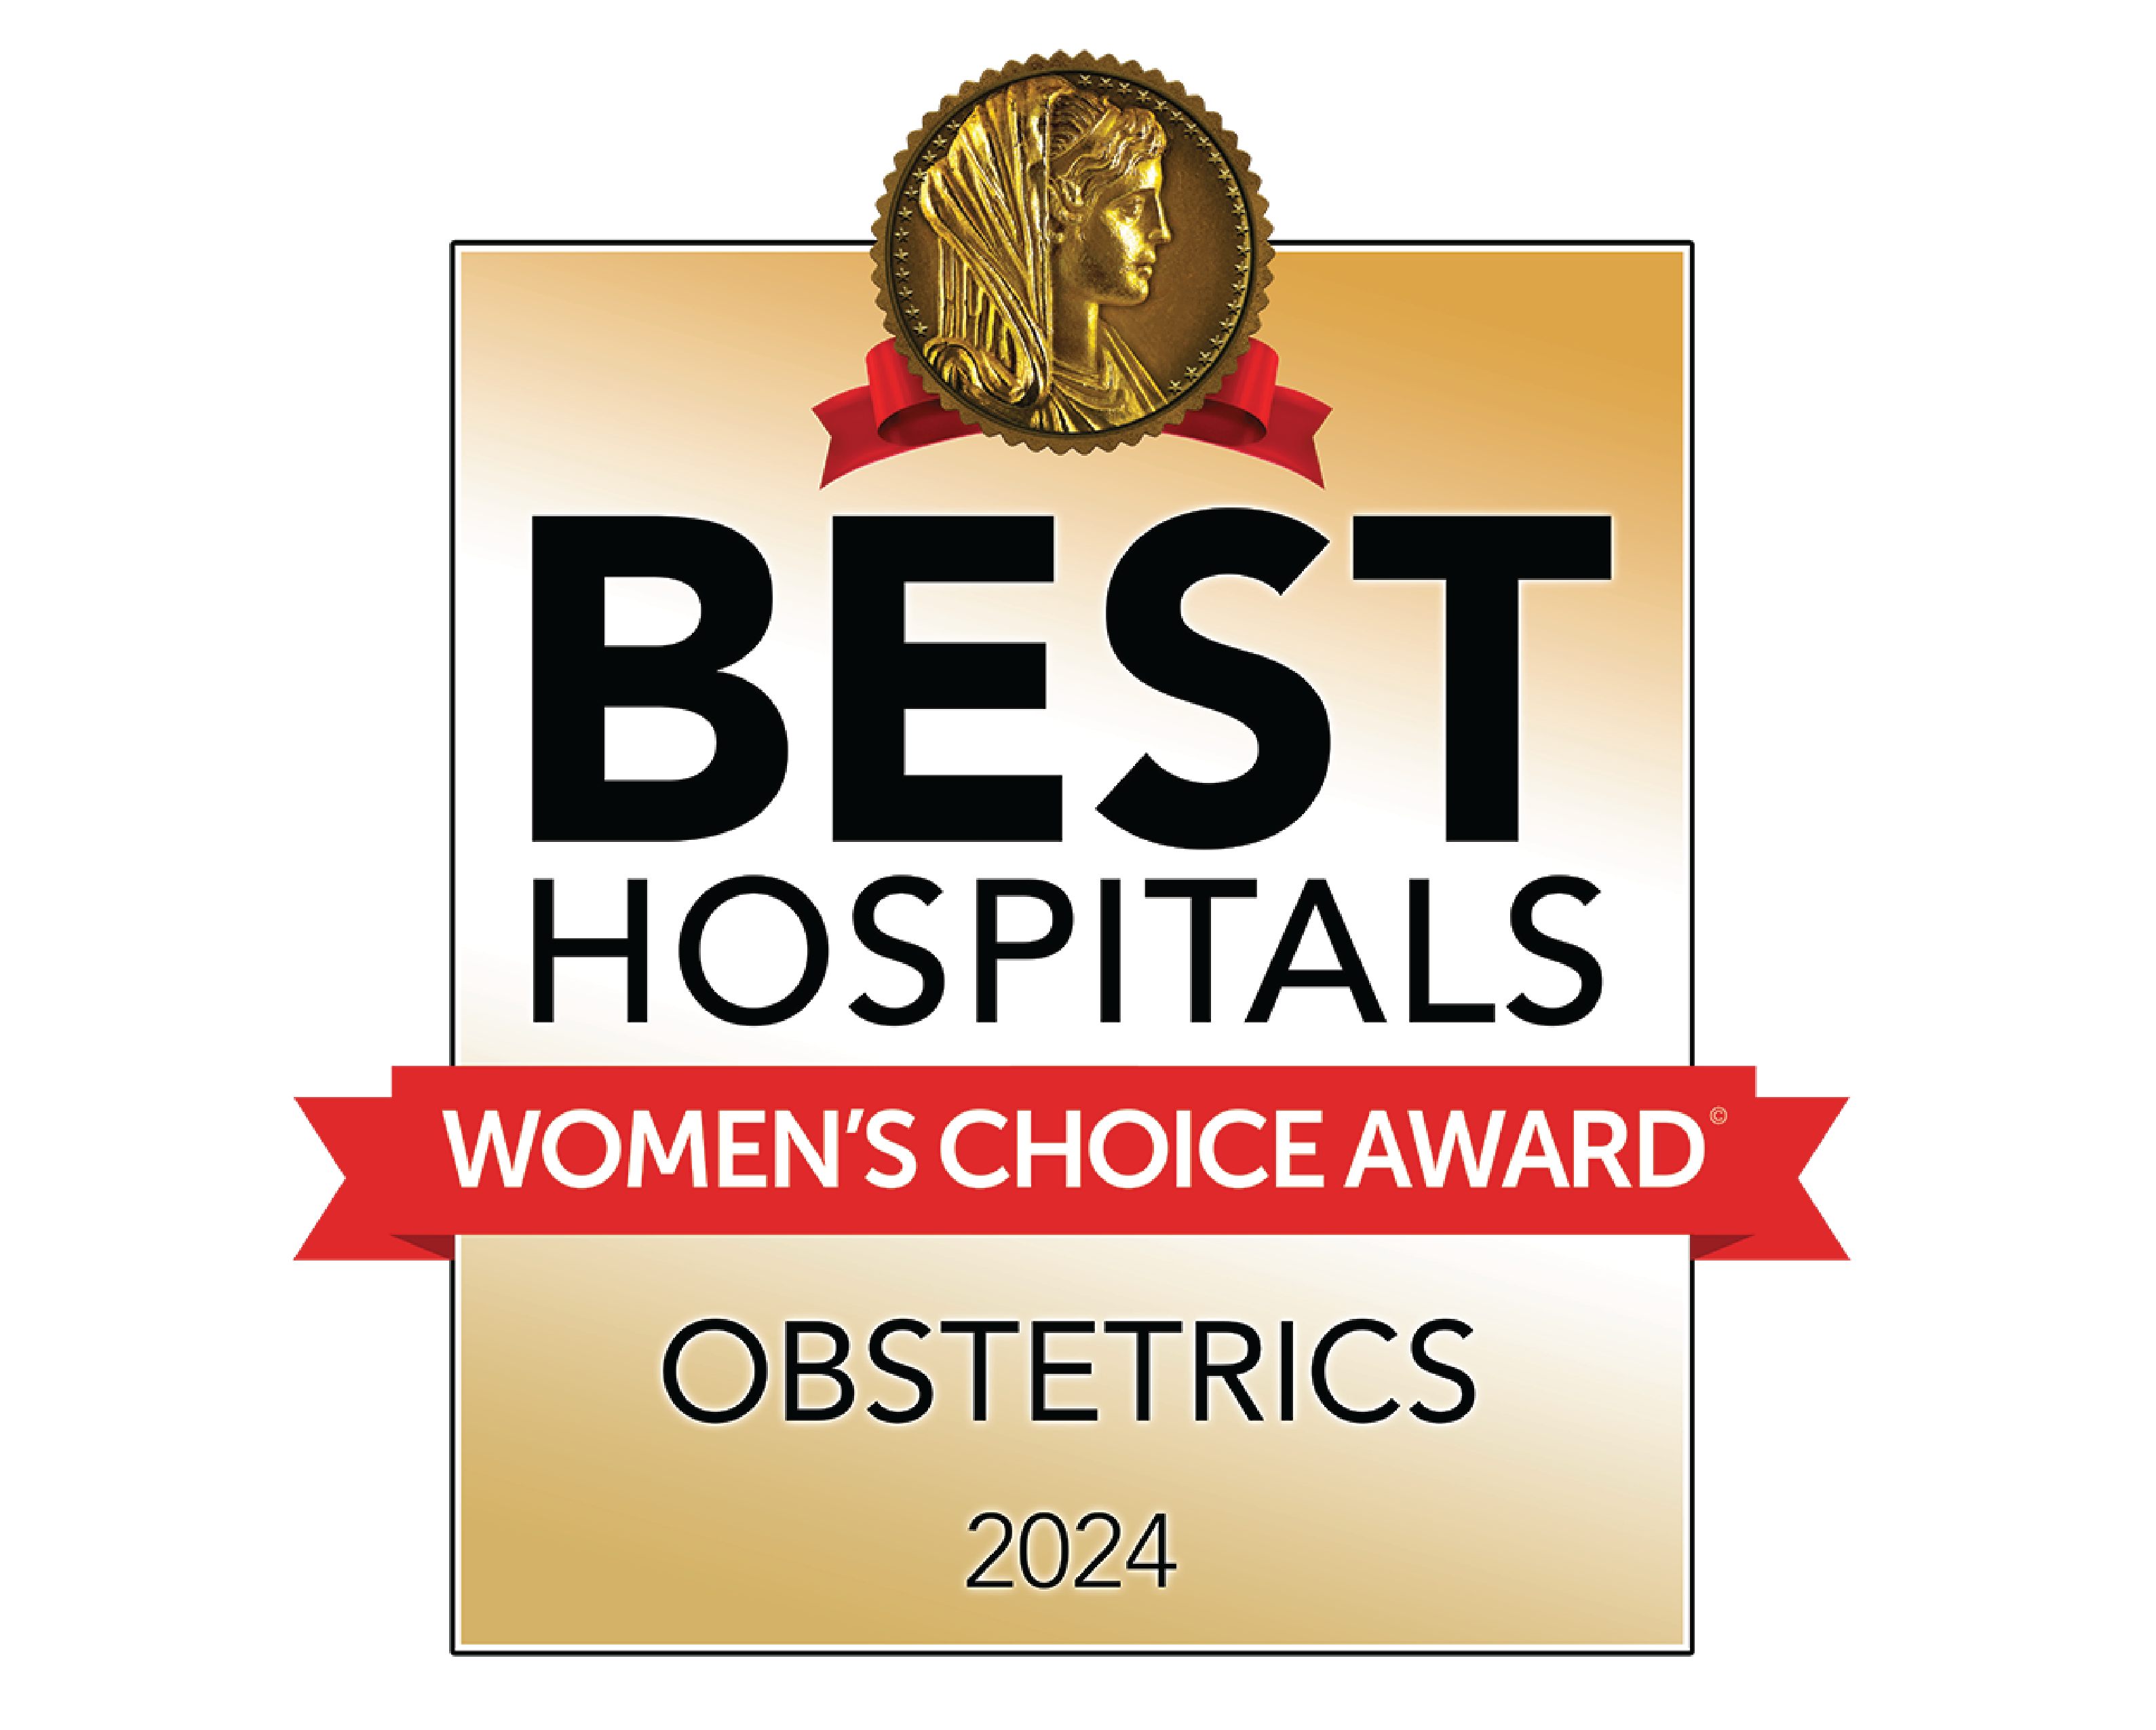 Newberry Hospital Receives the 2024 Women’s Choice Award® as one of America’s Best Hospitals for Obstetrics